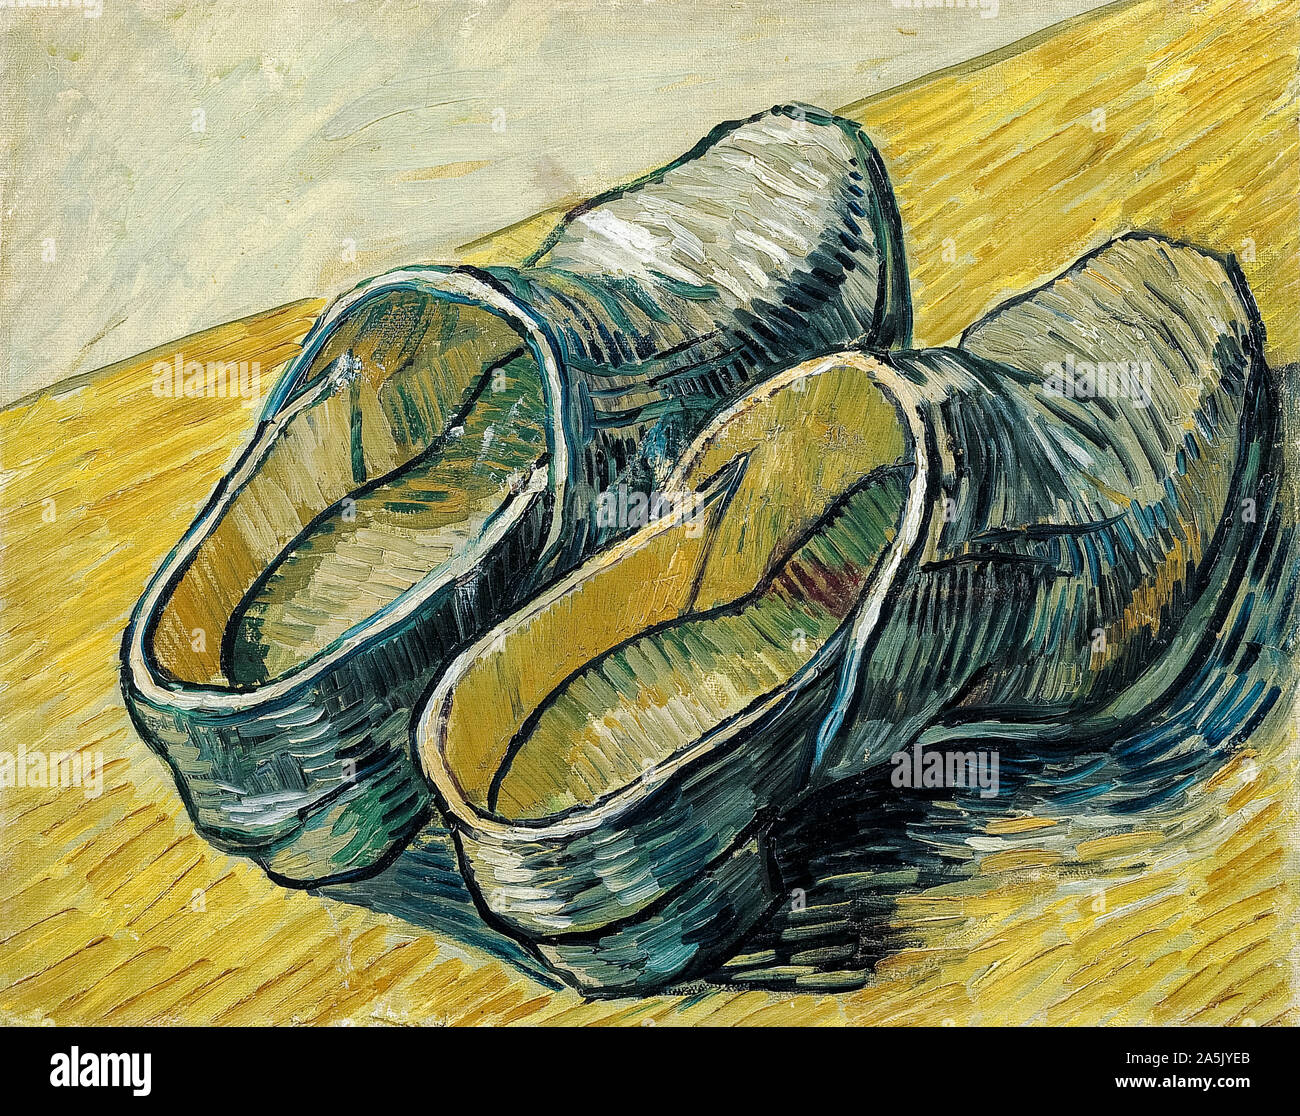 Vincent van Gogh, A pair of leather clogs, still life painting, 1888 Stock Photo